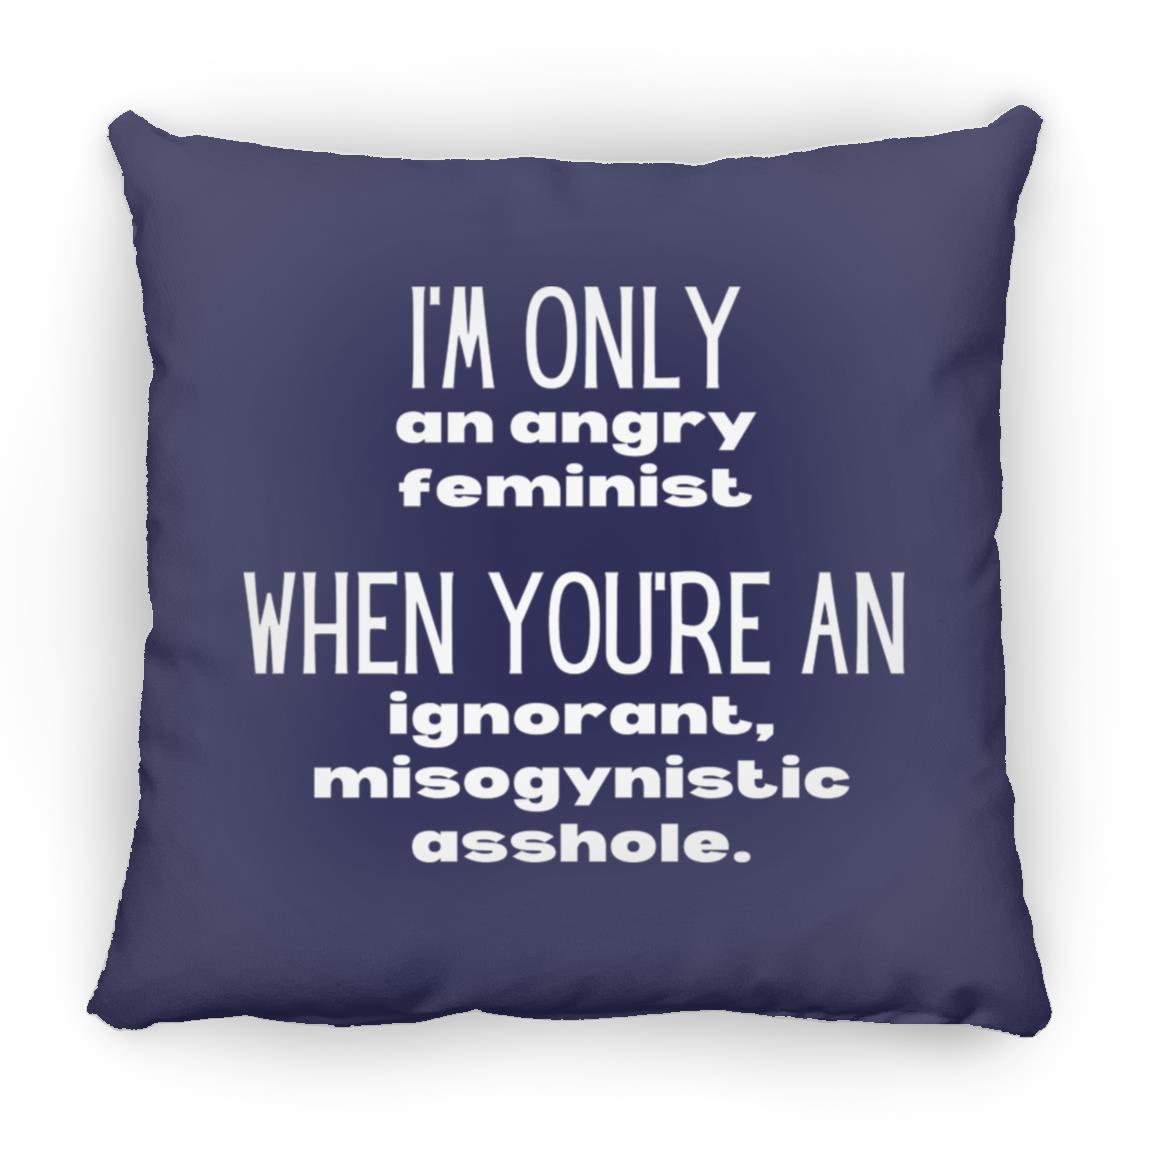 I'm Only An Angry Feminist Throw Pillow